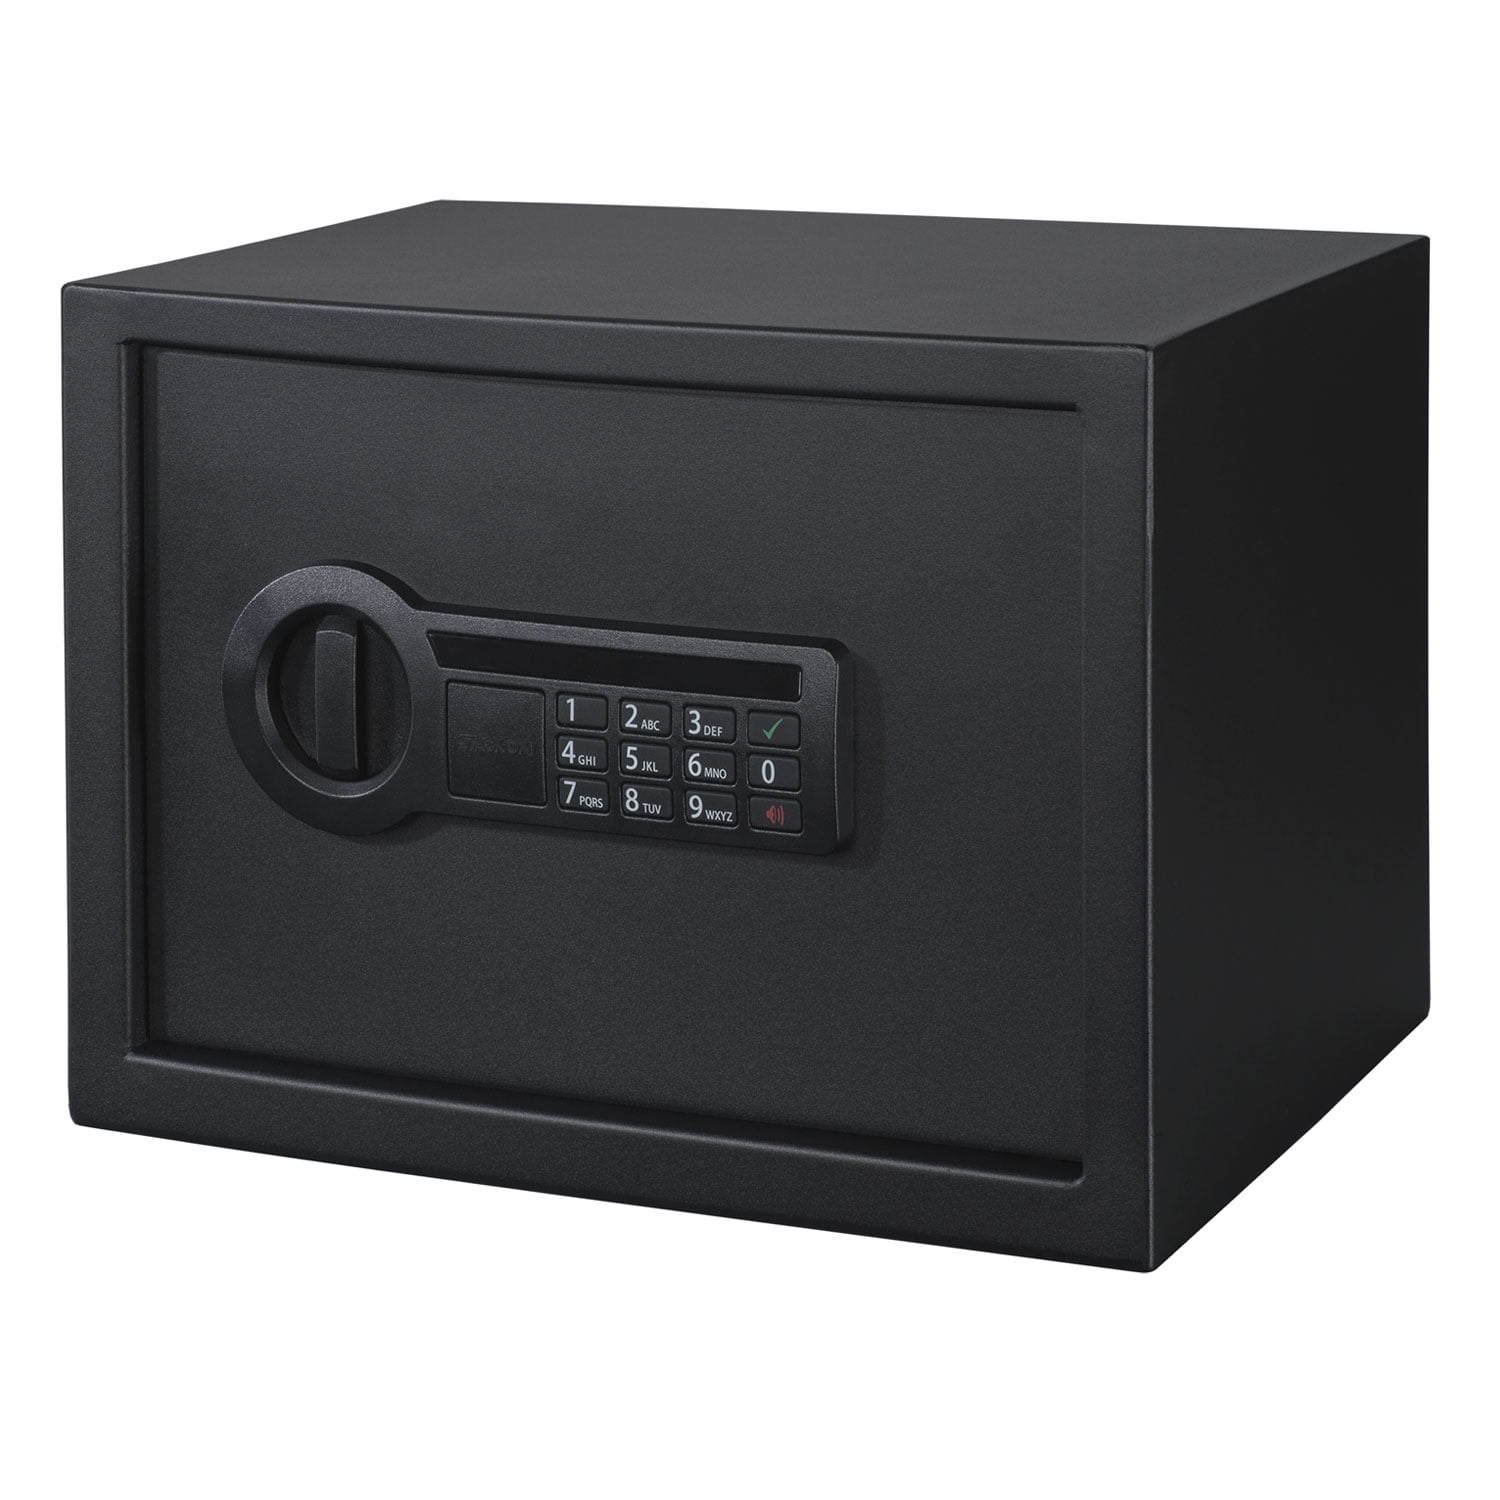 Stack-On Black Personal Safe With Electronic Lock Ps-1814-e for sale online 